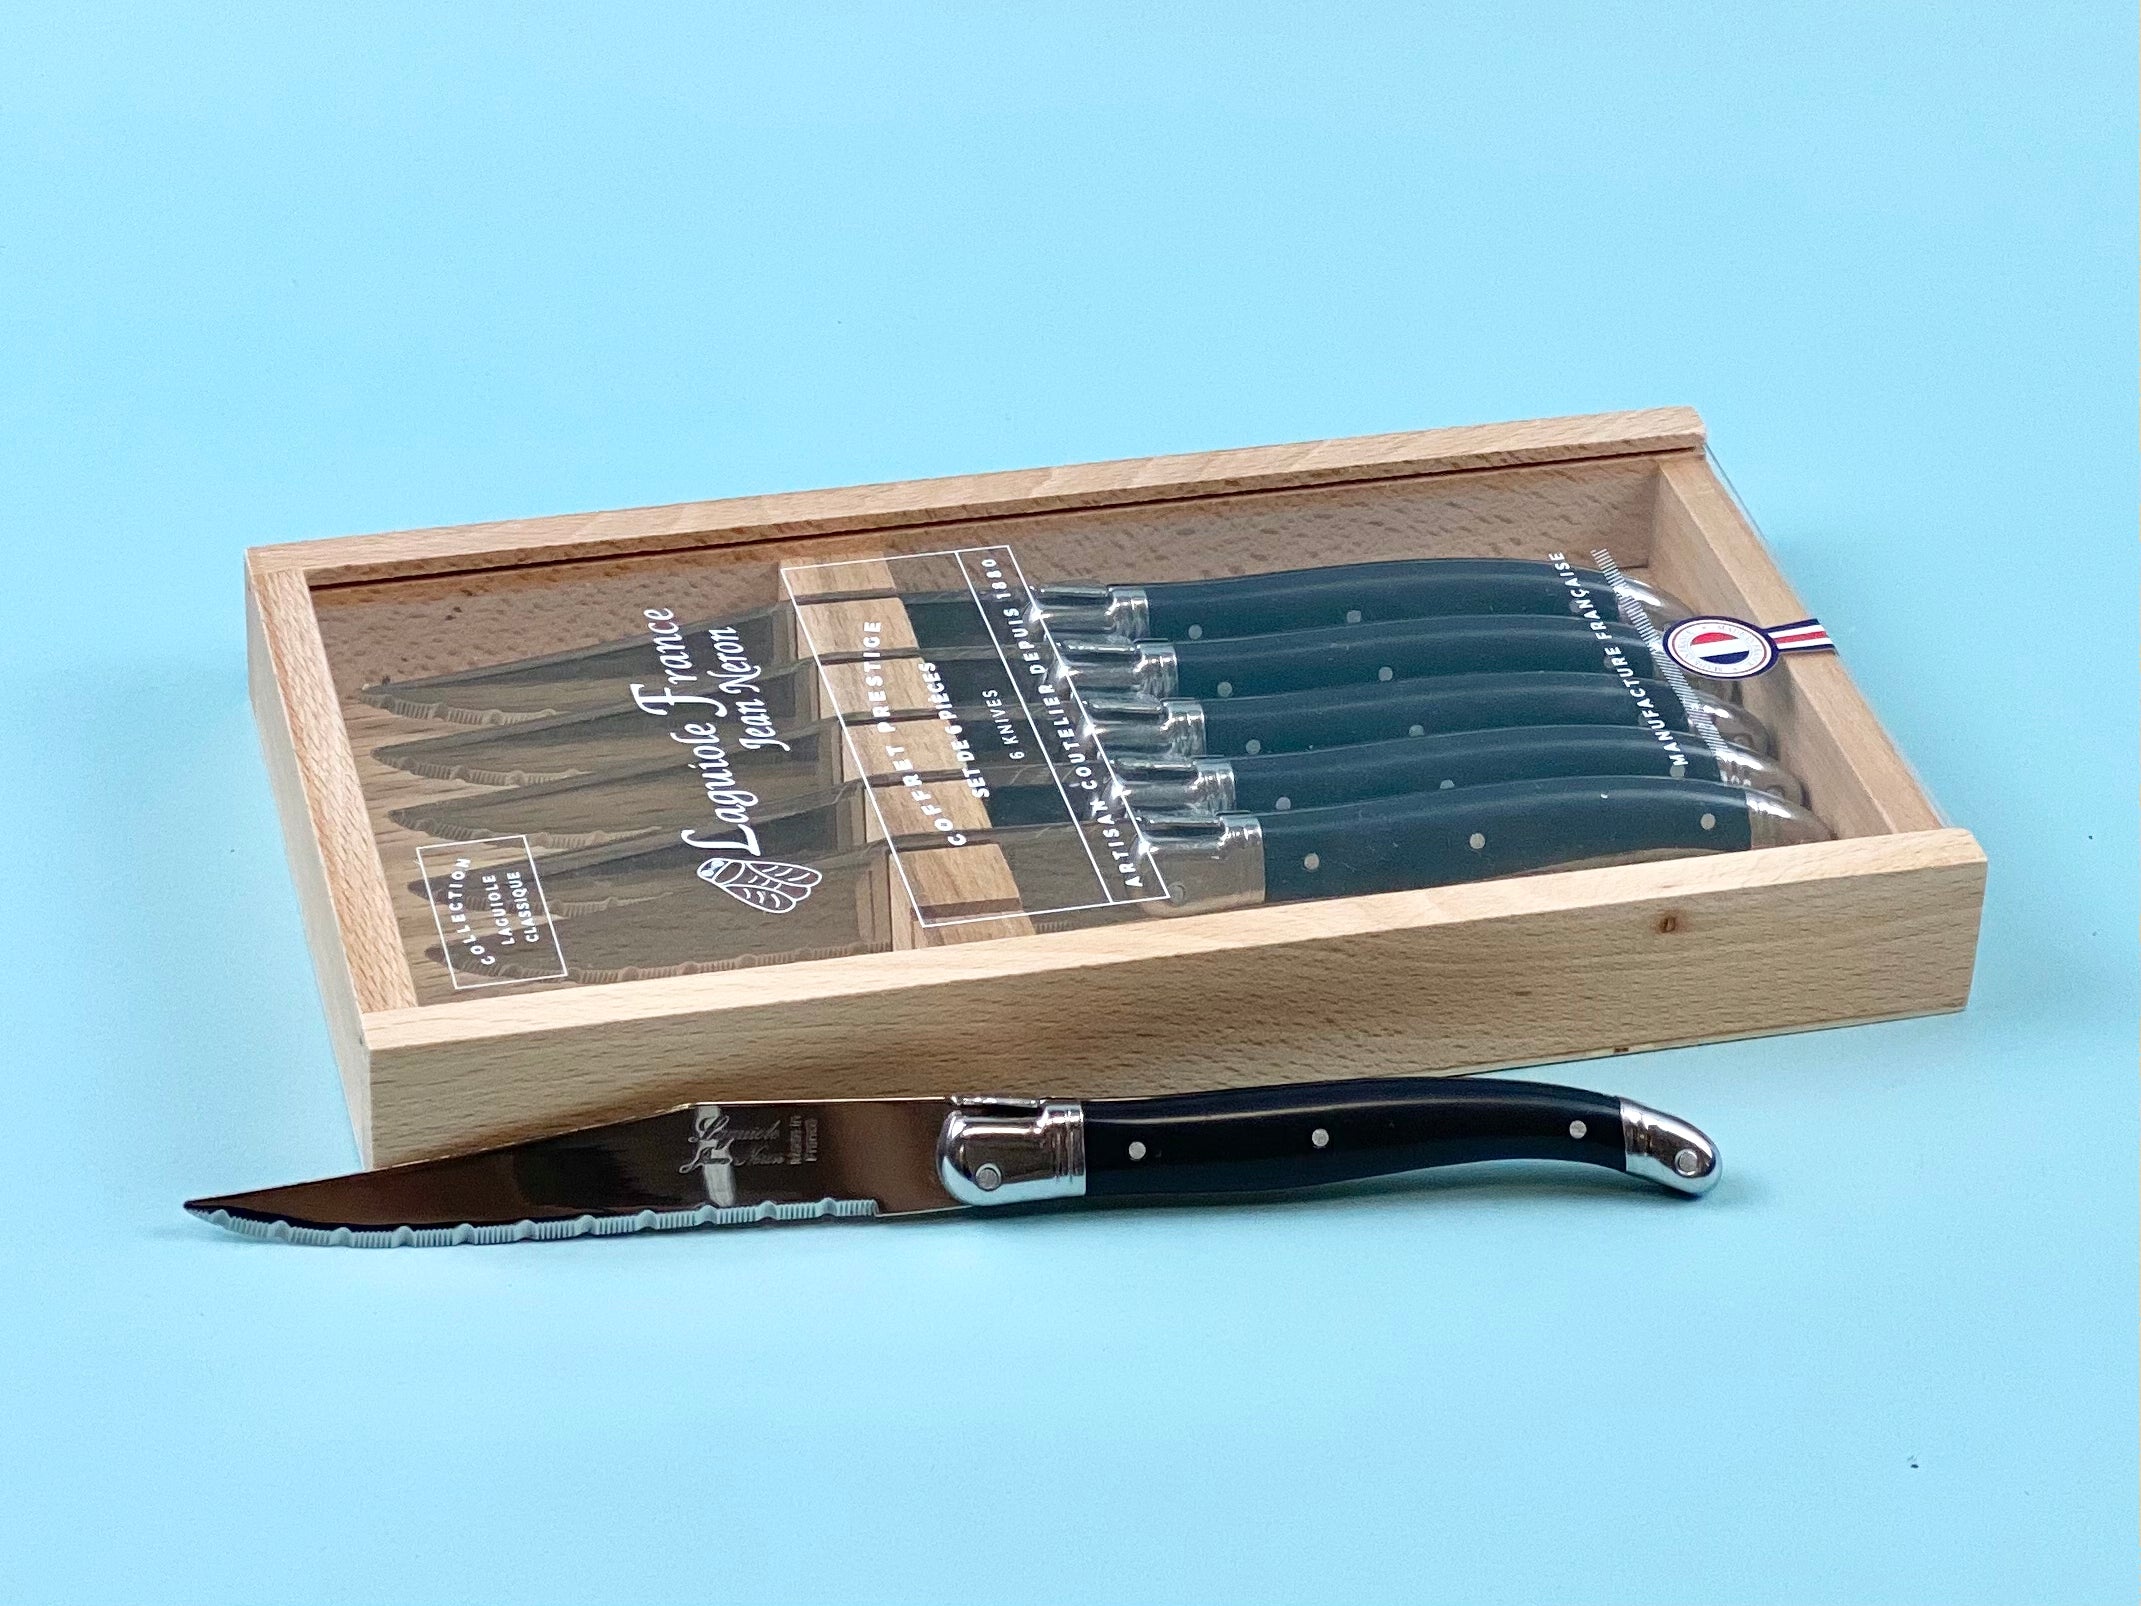 Laguiole Black Platine Knives in Wooden Box with Acrylic Lid (Set of 6) Cutlery Laguiole Brand_Laguiole Kitchen_Dinnerware Kitchen_Kitchenware Knife Sets Laguiole Spring Collection 790060540MBKAL_25afcb8b-c1fd-47cc-9ef5-0dafcea01e23